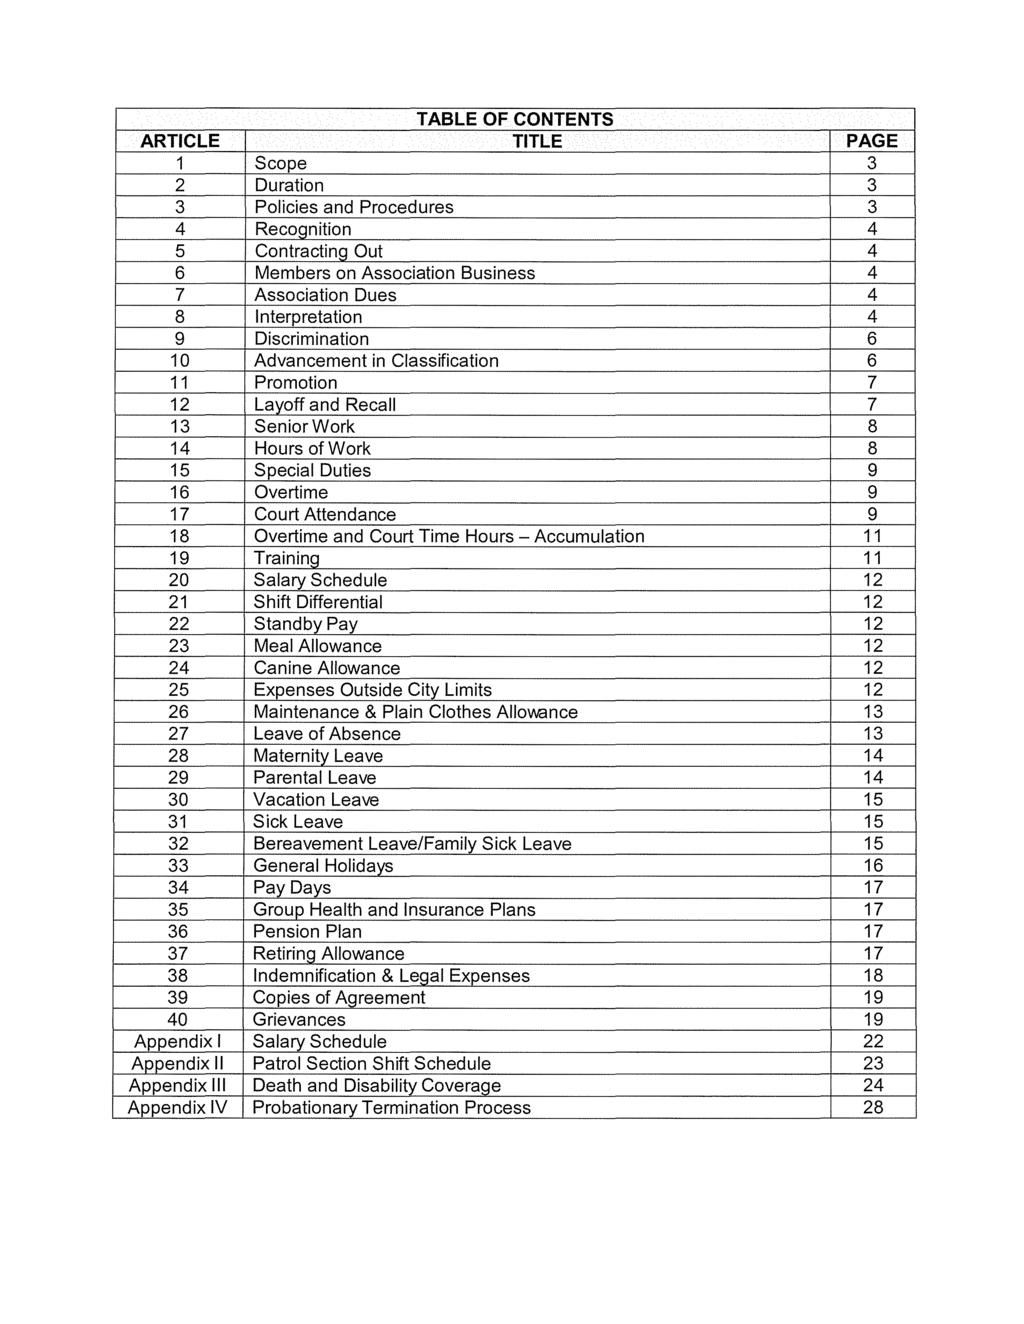 TABLE OF CONTENTS ARTICLE TITLE PAGE 1 Scope 3 2 Duration 3 3 Policies and Procedures 3 4 Recognition 4 5 Contracting Out 4 6 Members on Association Business 4 7 Association Dues 4 8 Interpretation 4